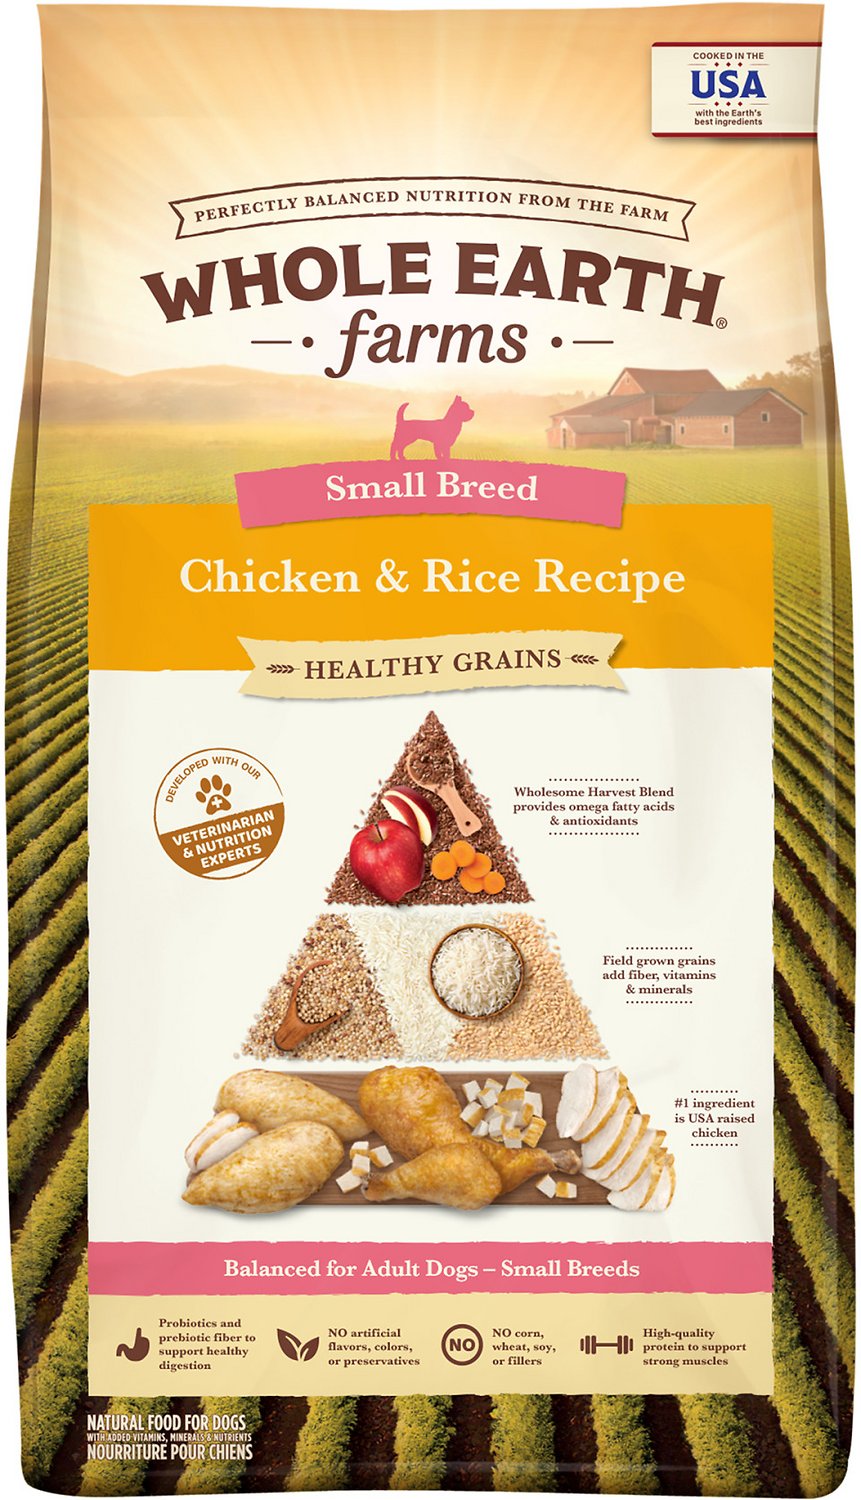 Healthy Grains Small Breed Chicken & Rice Dog food by Whole Earth Farms